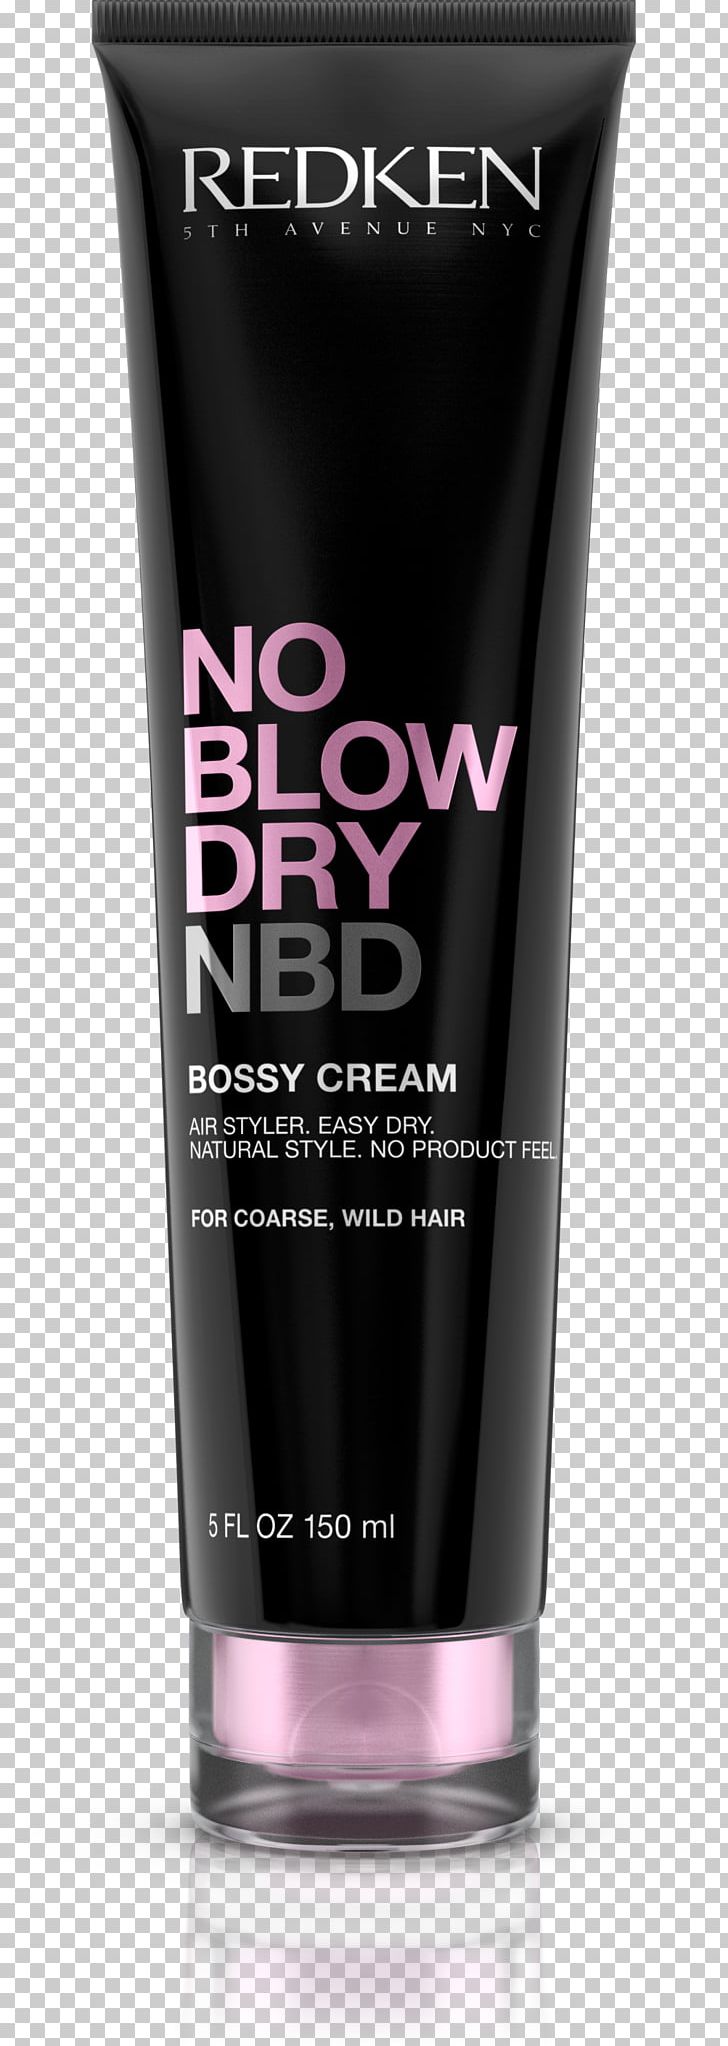 Redken No Blow Dry Airy Cream Redken No Blow Dry Bossy Cream Hair Styling Products Hair Care PNG, Clipart, Beauty, Beauty Parlour, Bossy, Cosmetics, Cream Free PNG Download